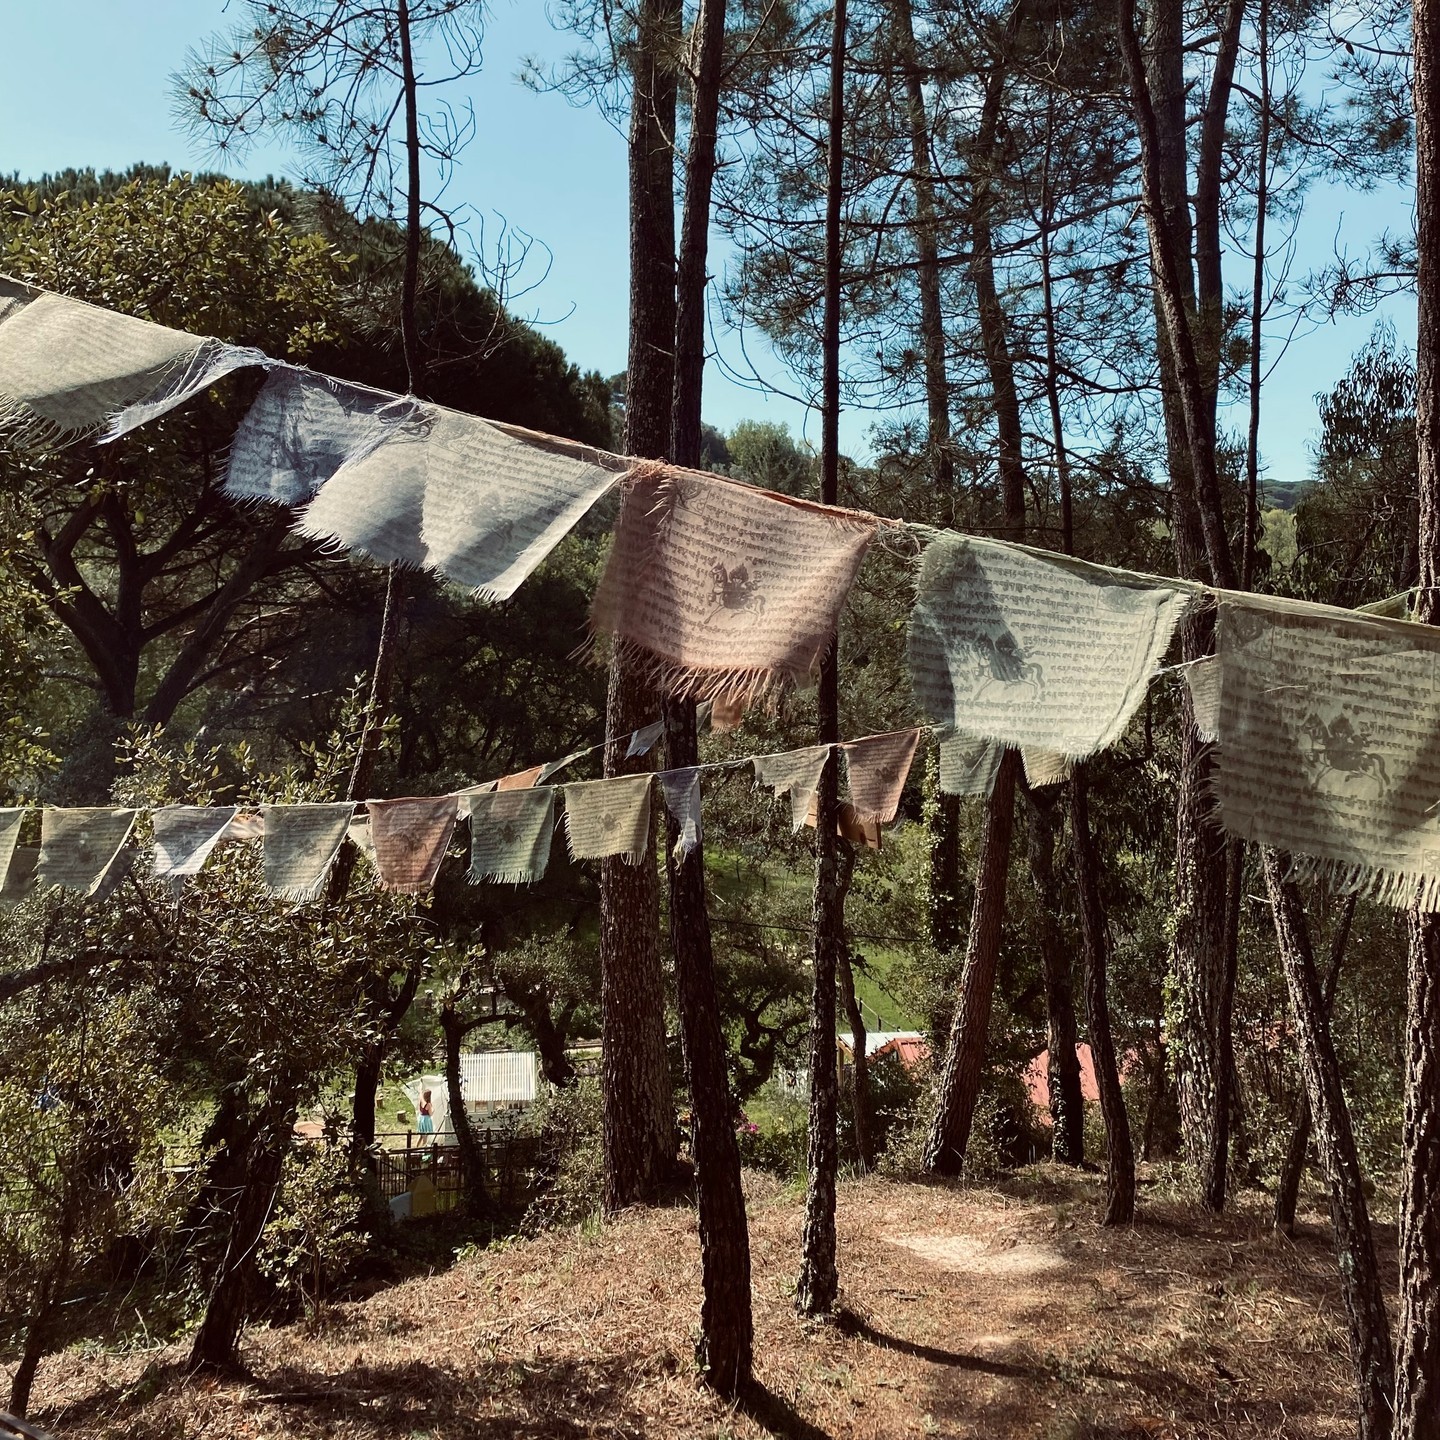 There are only a few spots left to join me in September at this beautiful yoga deck in Portugal for our 'Still Mind, Wild Heart' retreat. 🙏🏼⁠
⁠
Are you keen to meet likeminded women, immerse yourself in feminine energy, practice yoga, meditation & journaling on the daily and enjoy the September sunshine? 🌞⁠
⁠
Check the link in my bio (and the highlight on my profile!) for all the details on our Portugal retreat, taking place from 7 to 11 September. You still have the choice between private or shared accommodation and I'm here if you have any questions! 🧡⁠
⁠
It would be an honour (and SO FUN!) to hold space for you and meet you there! x